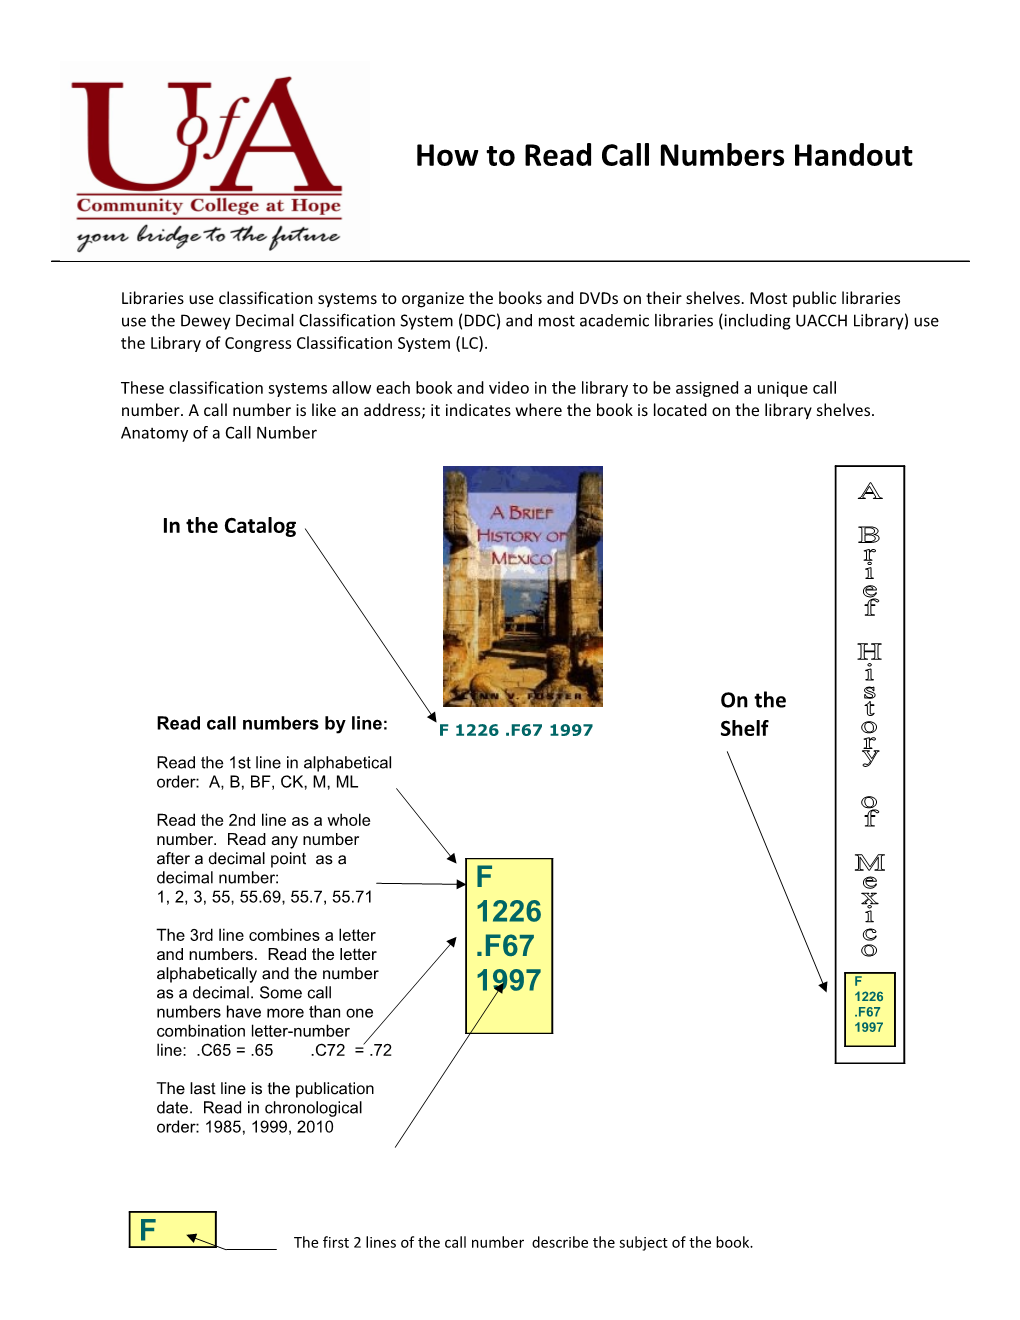 How to Read Call Numbers Handout